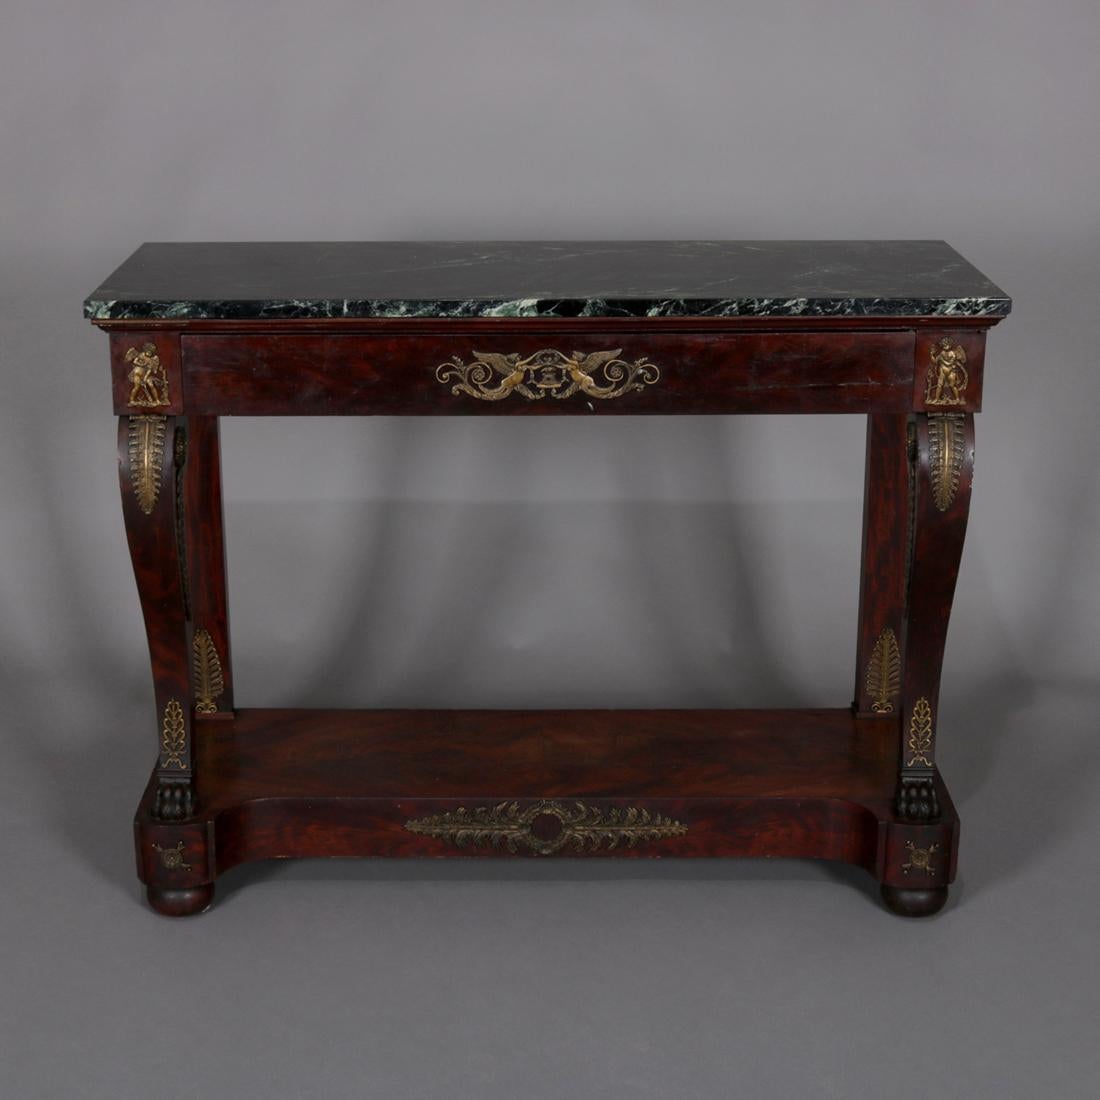 Antique French Empire Neoclassical Mahogany and Ormolu Marble Top Pier Table 2